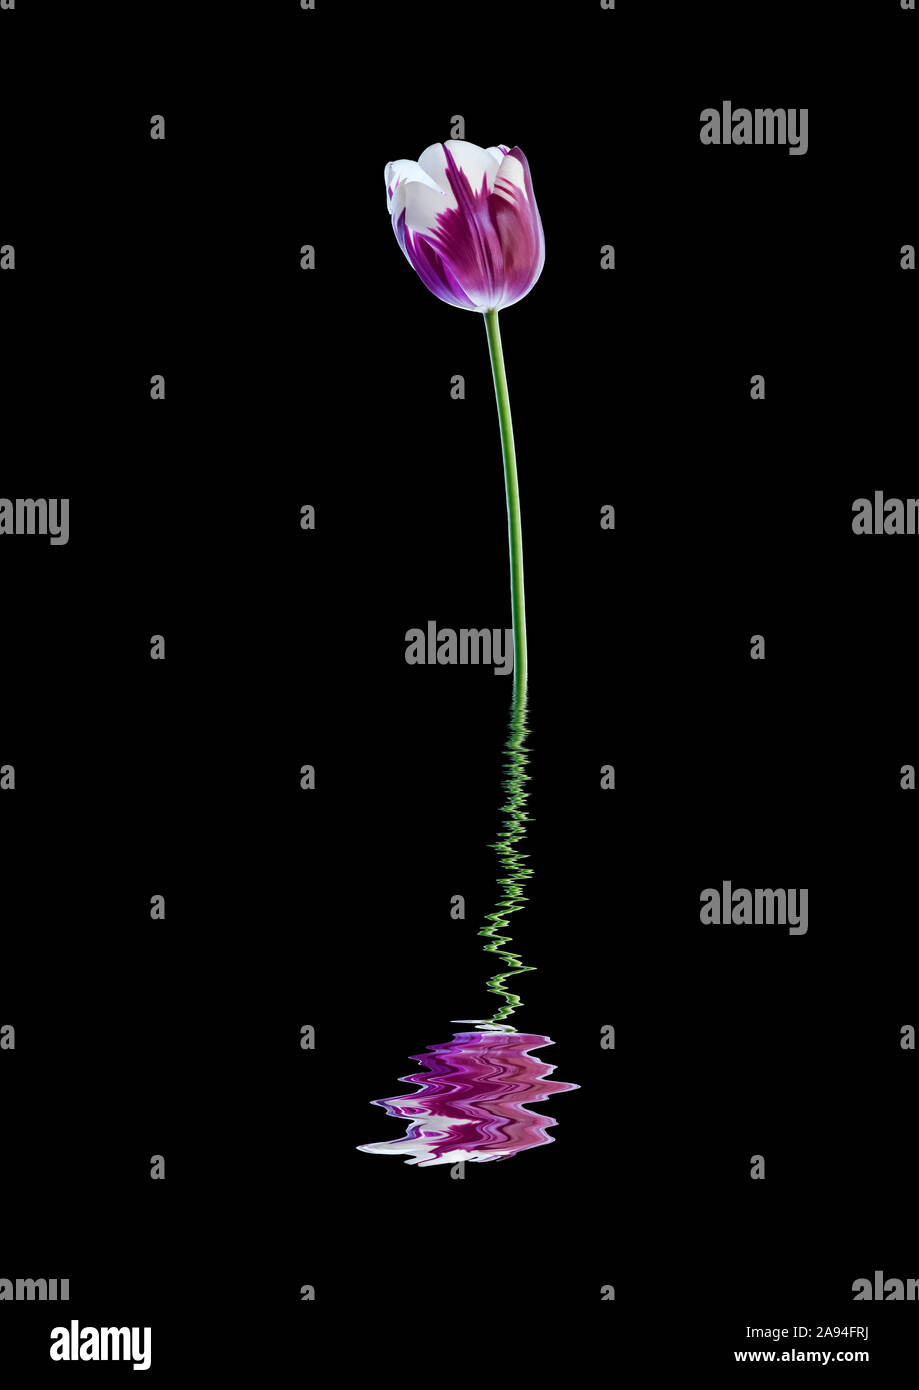 Art style image of white and purple tulip 'Rembrandt' reflected in water; Studio Stock Photo